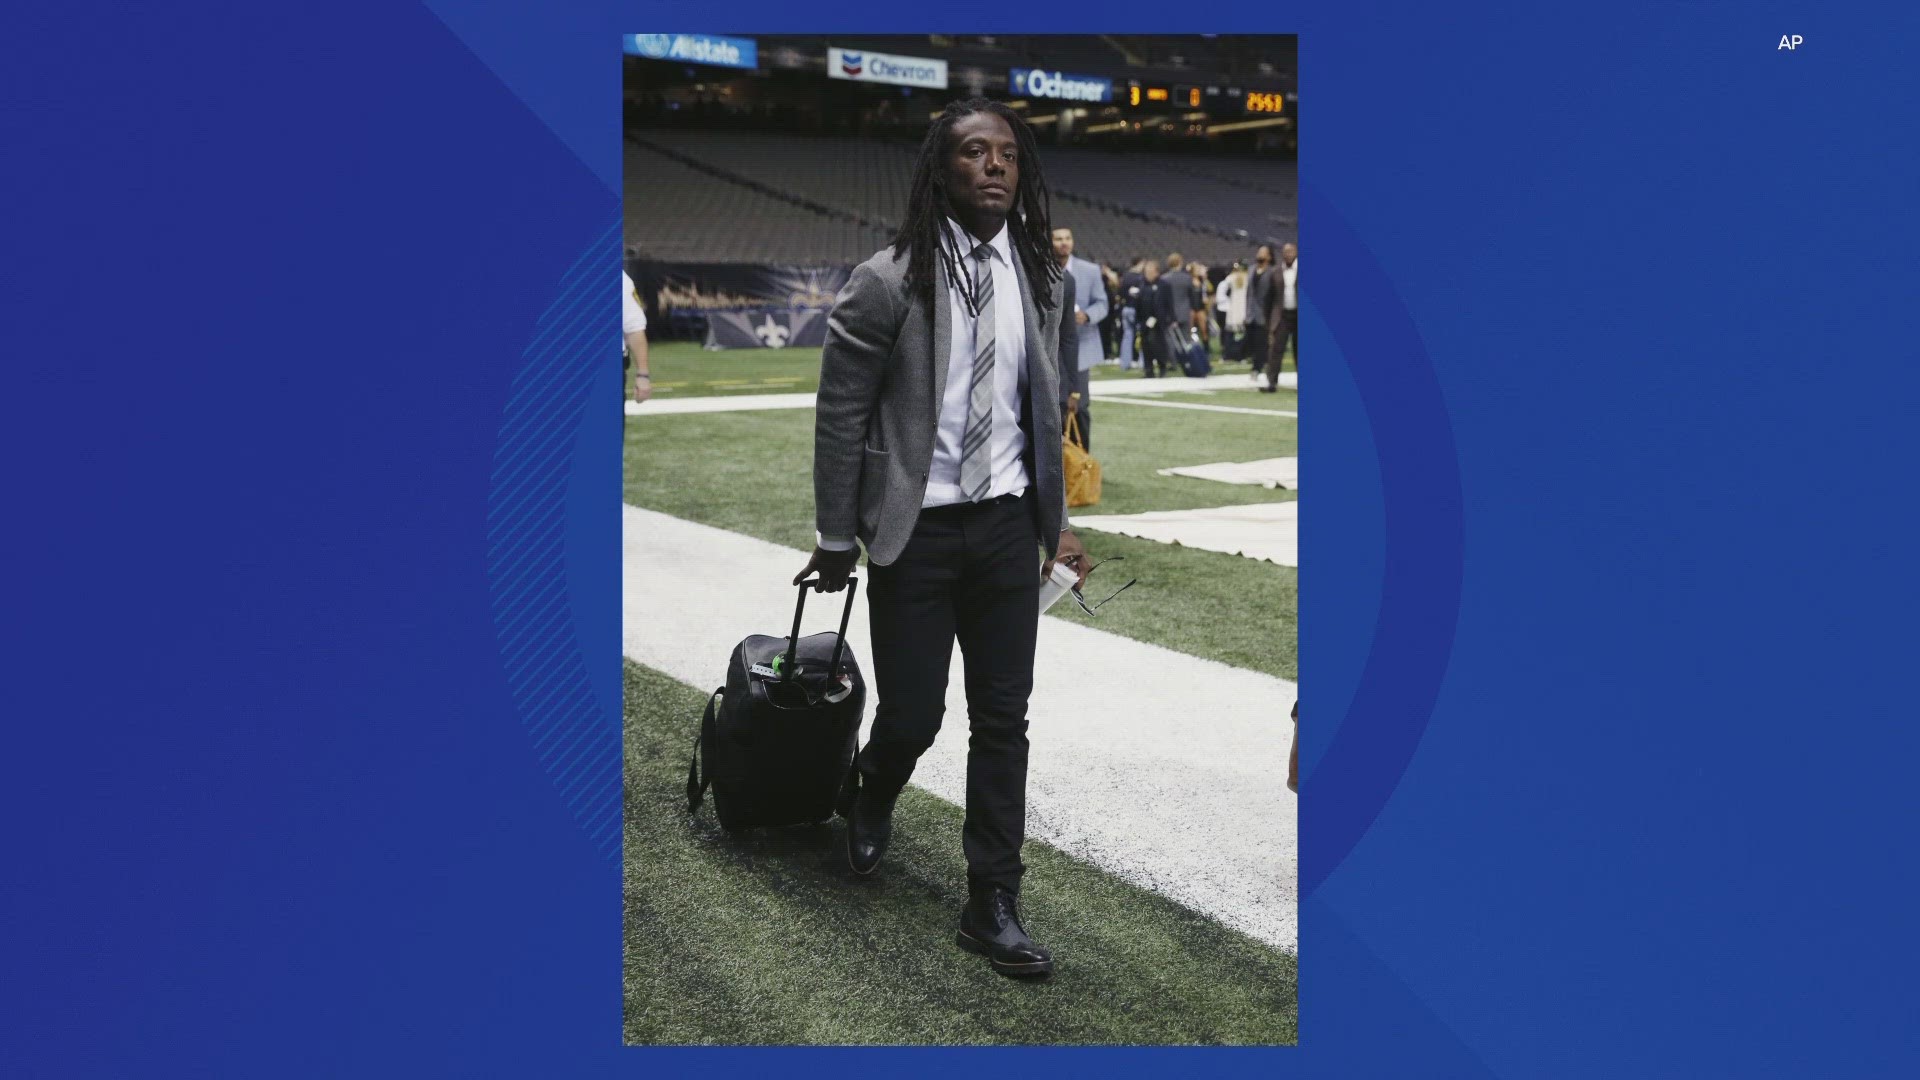 Sergio Brown, who played for the Colts from 2012-2014, is reportedly missing out of a Chicago suburb.